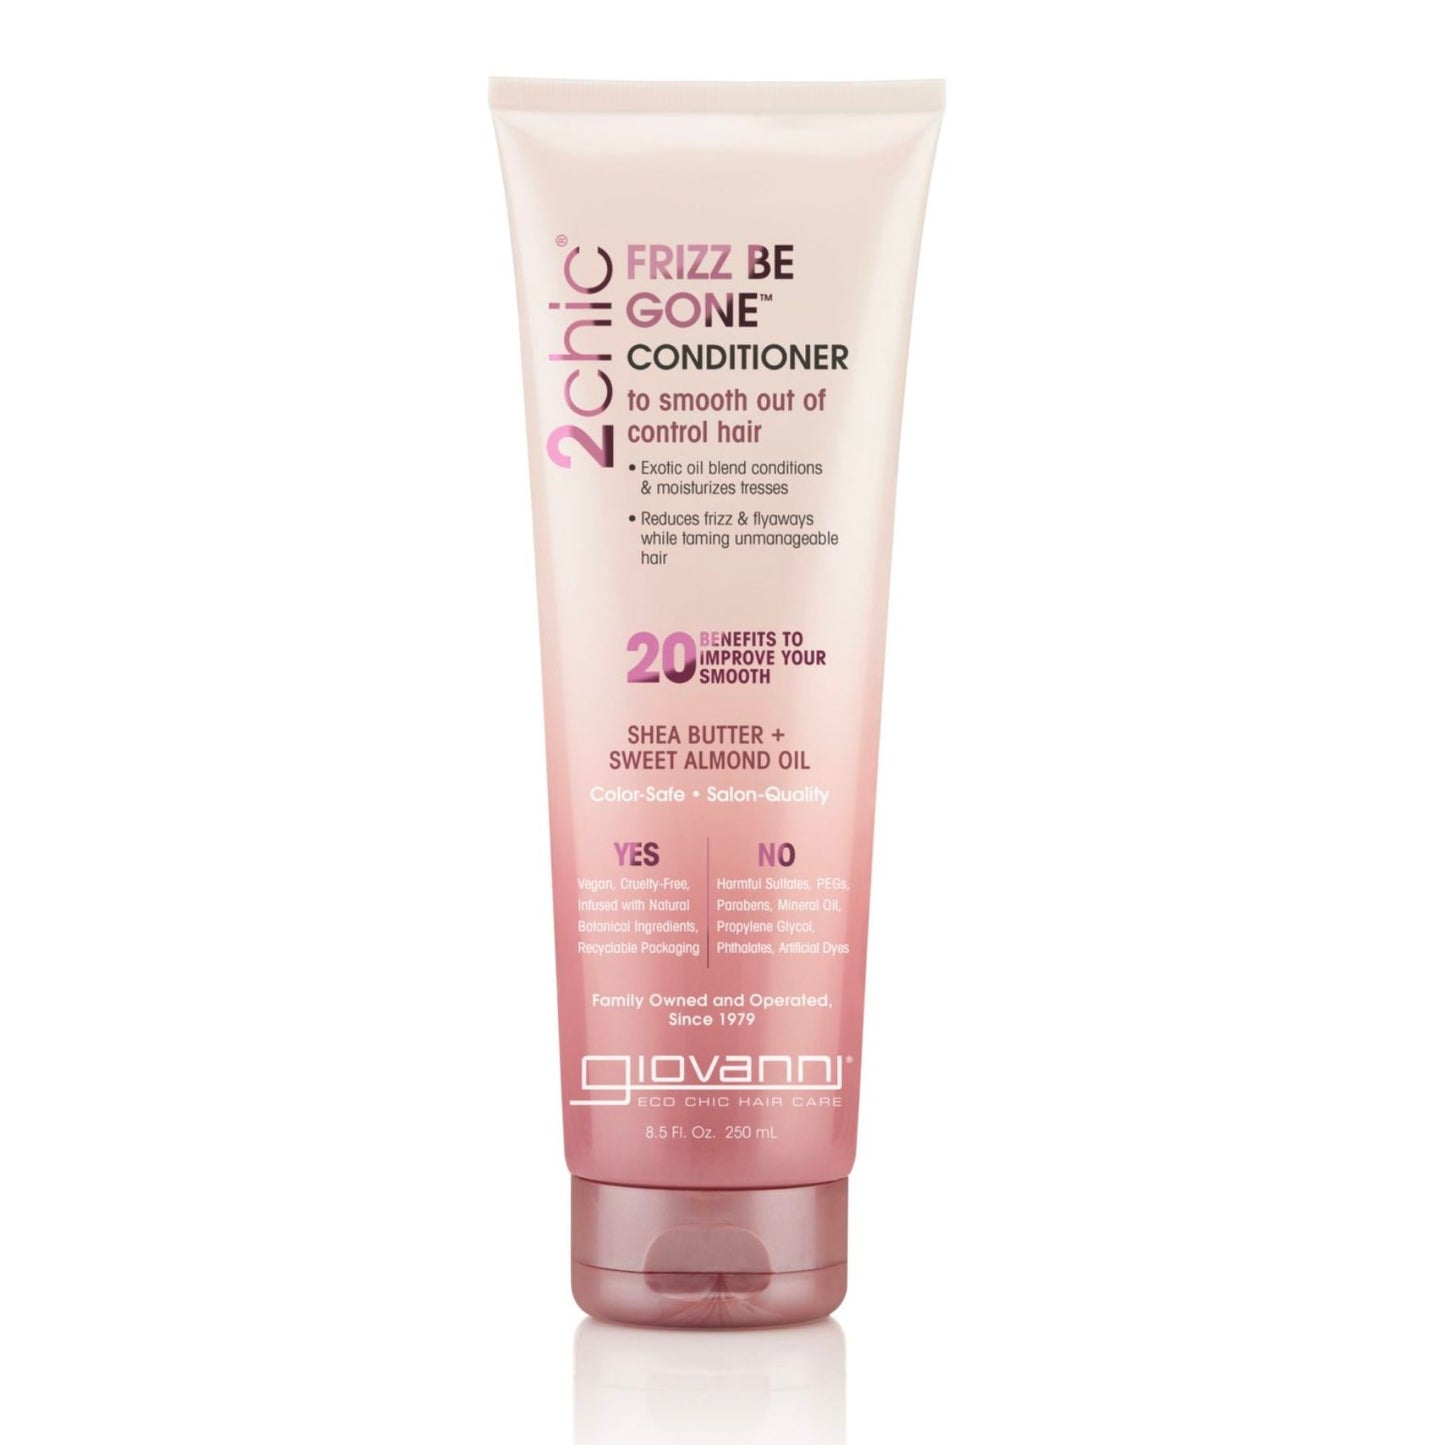 Giovanni 2Chic Frizz Be Gone Conditioner 250ml, To Smooth Out Of Control Hair